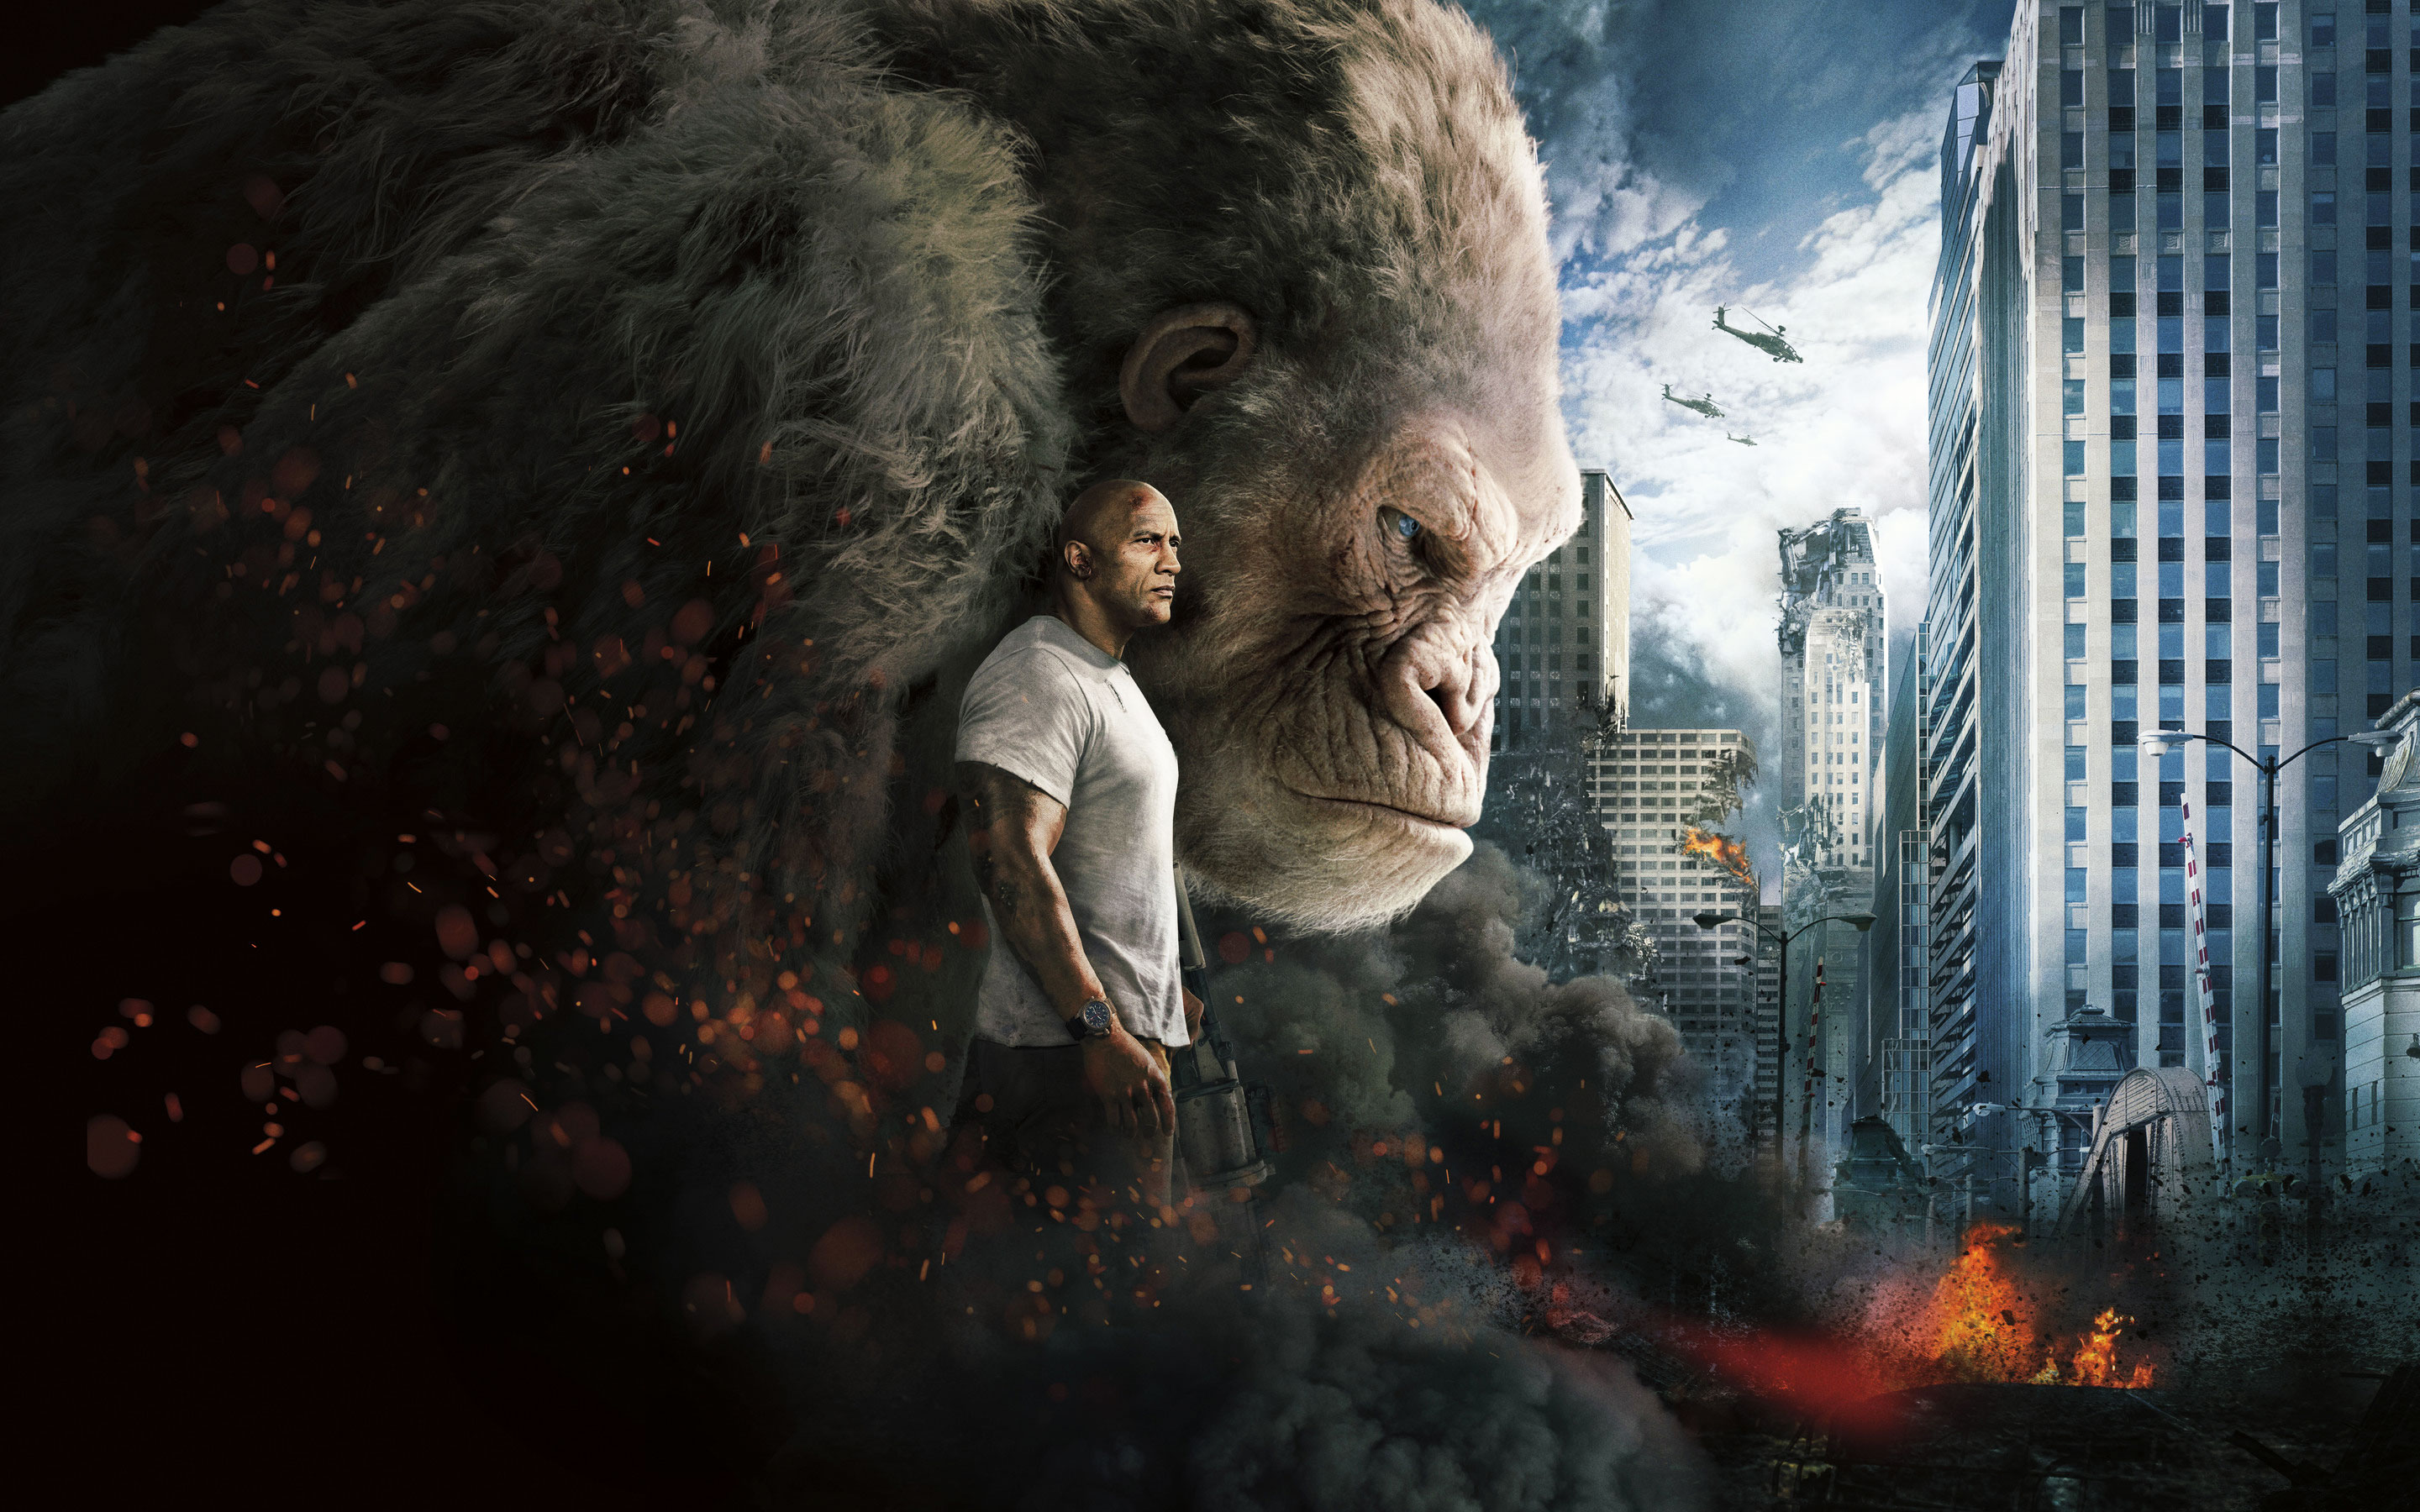 download rampage 2009 series movie for free online